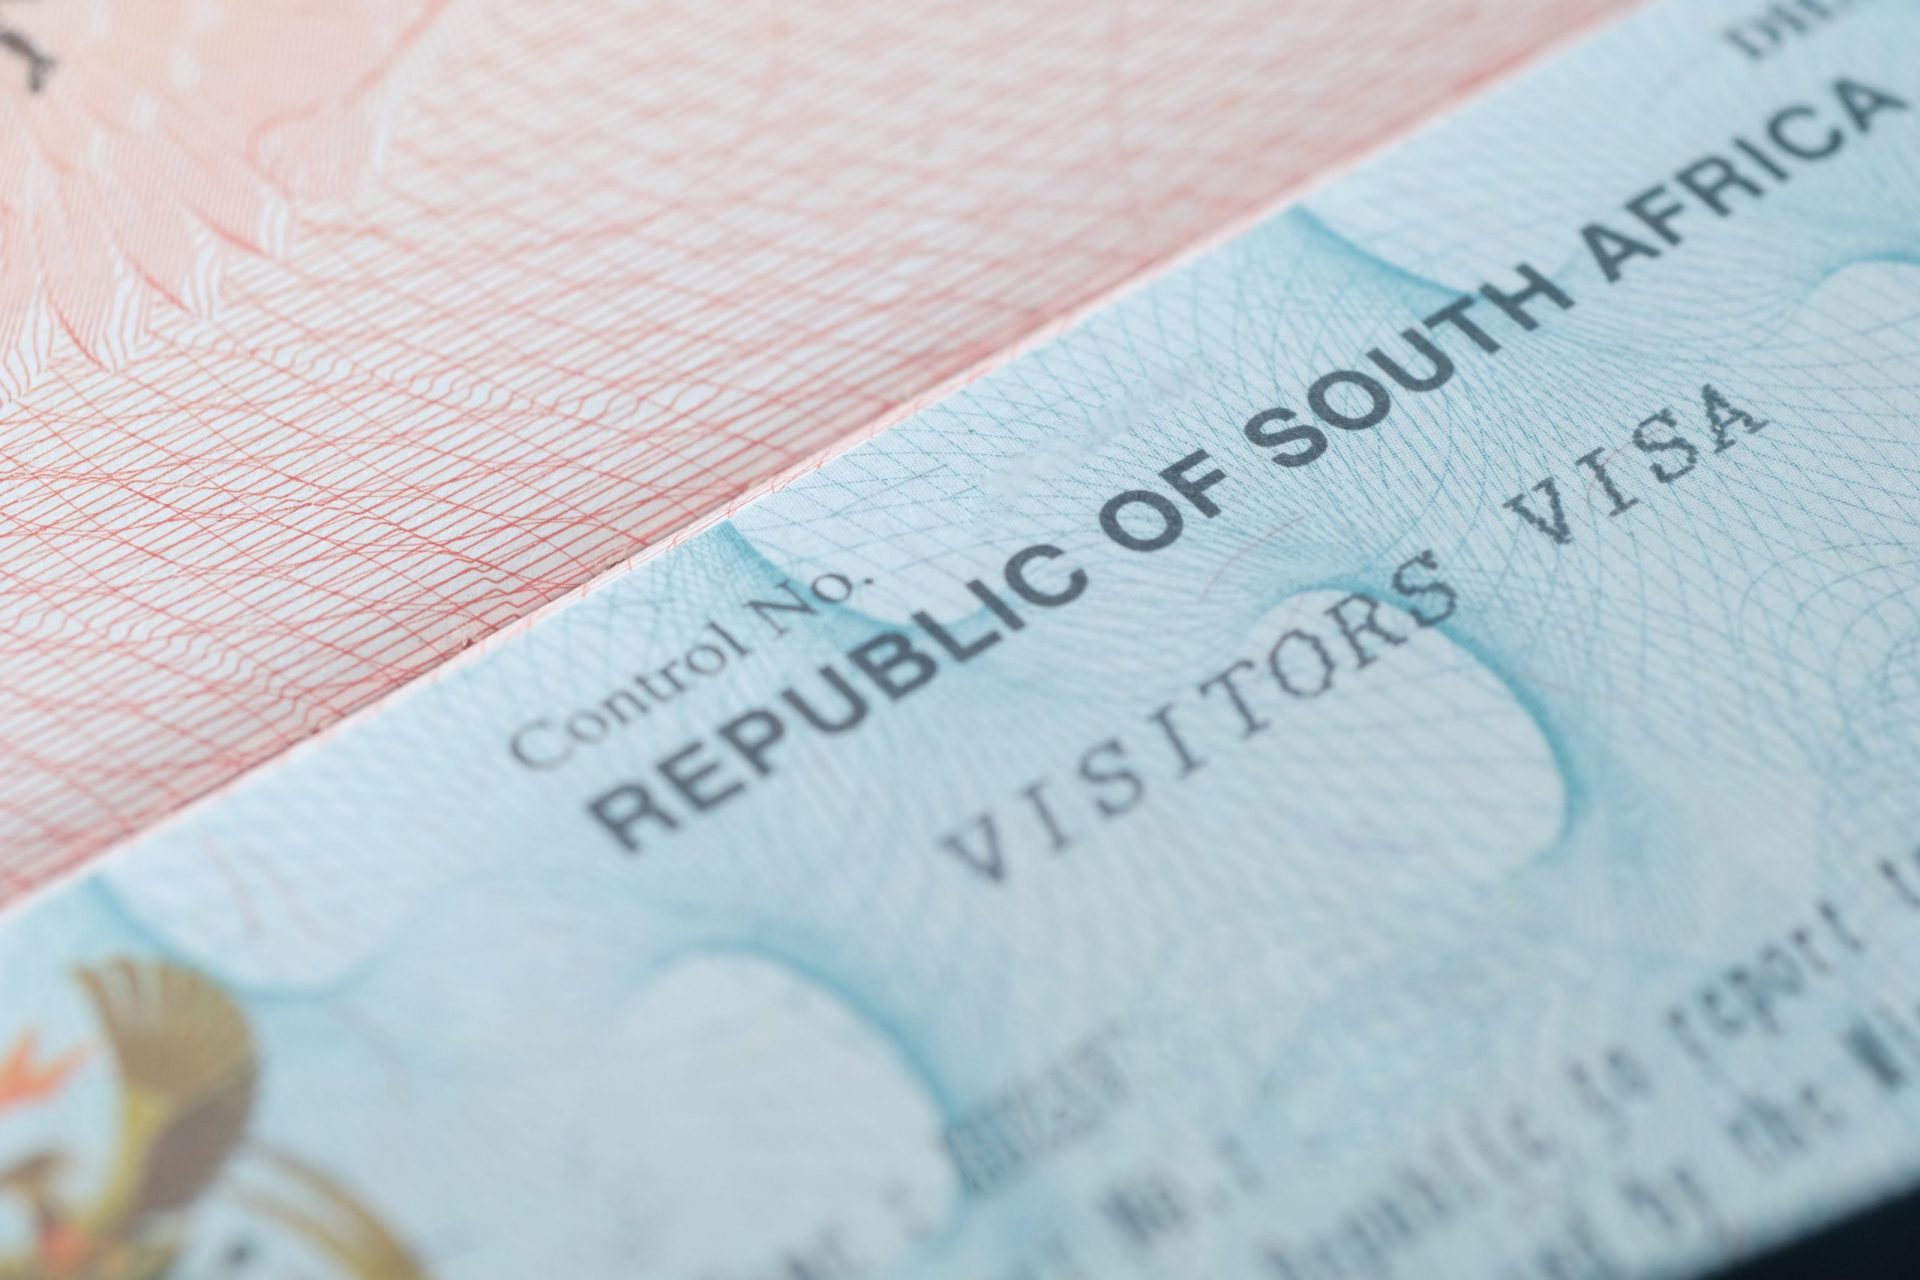 ireland visit visa from south africa